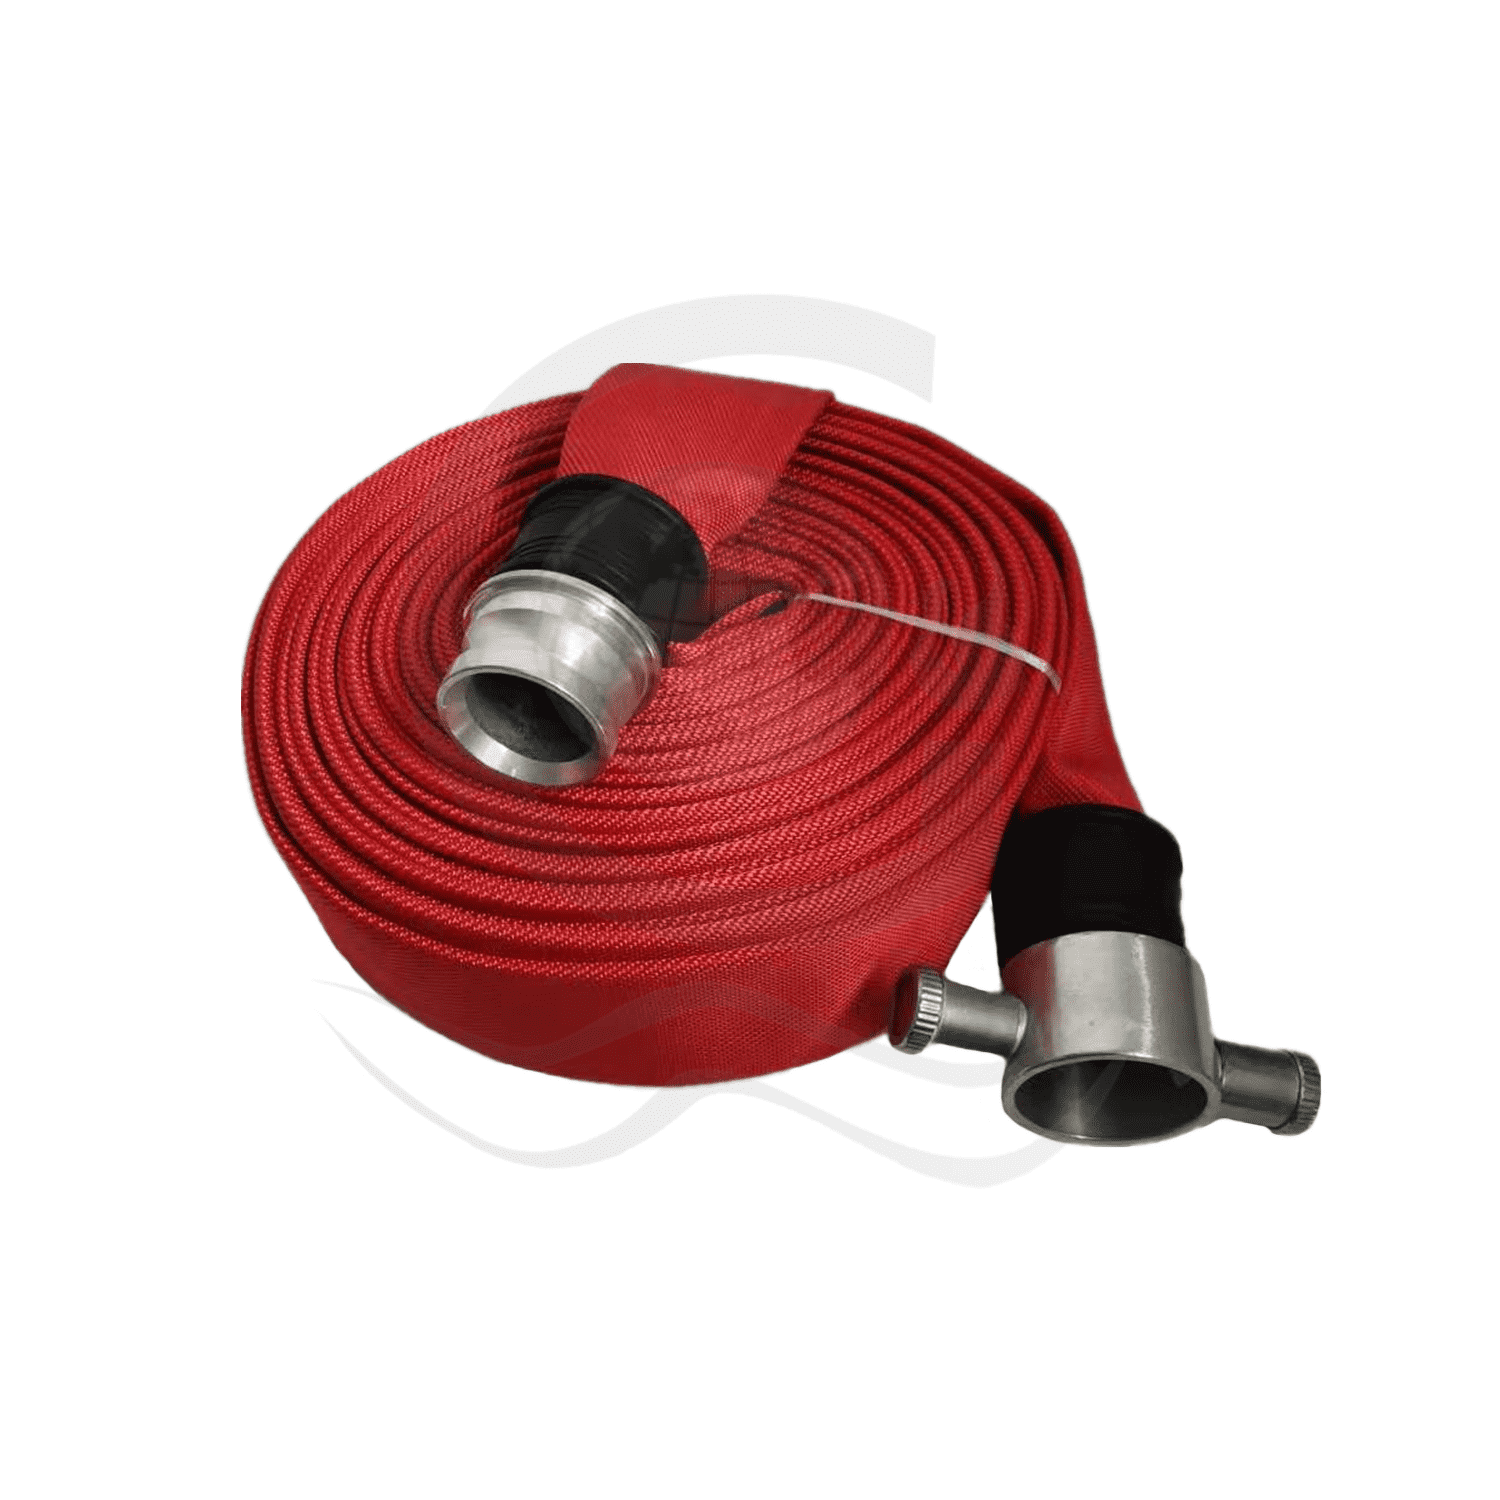 Special Design Widely Used Fire Hose Reel - China Lpcb Approval, Hose Reel